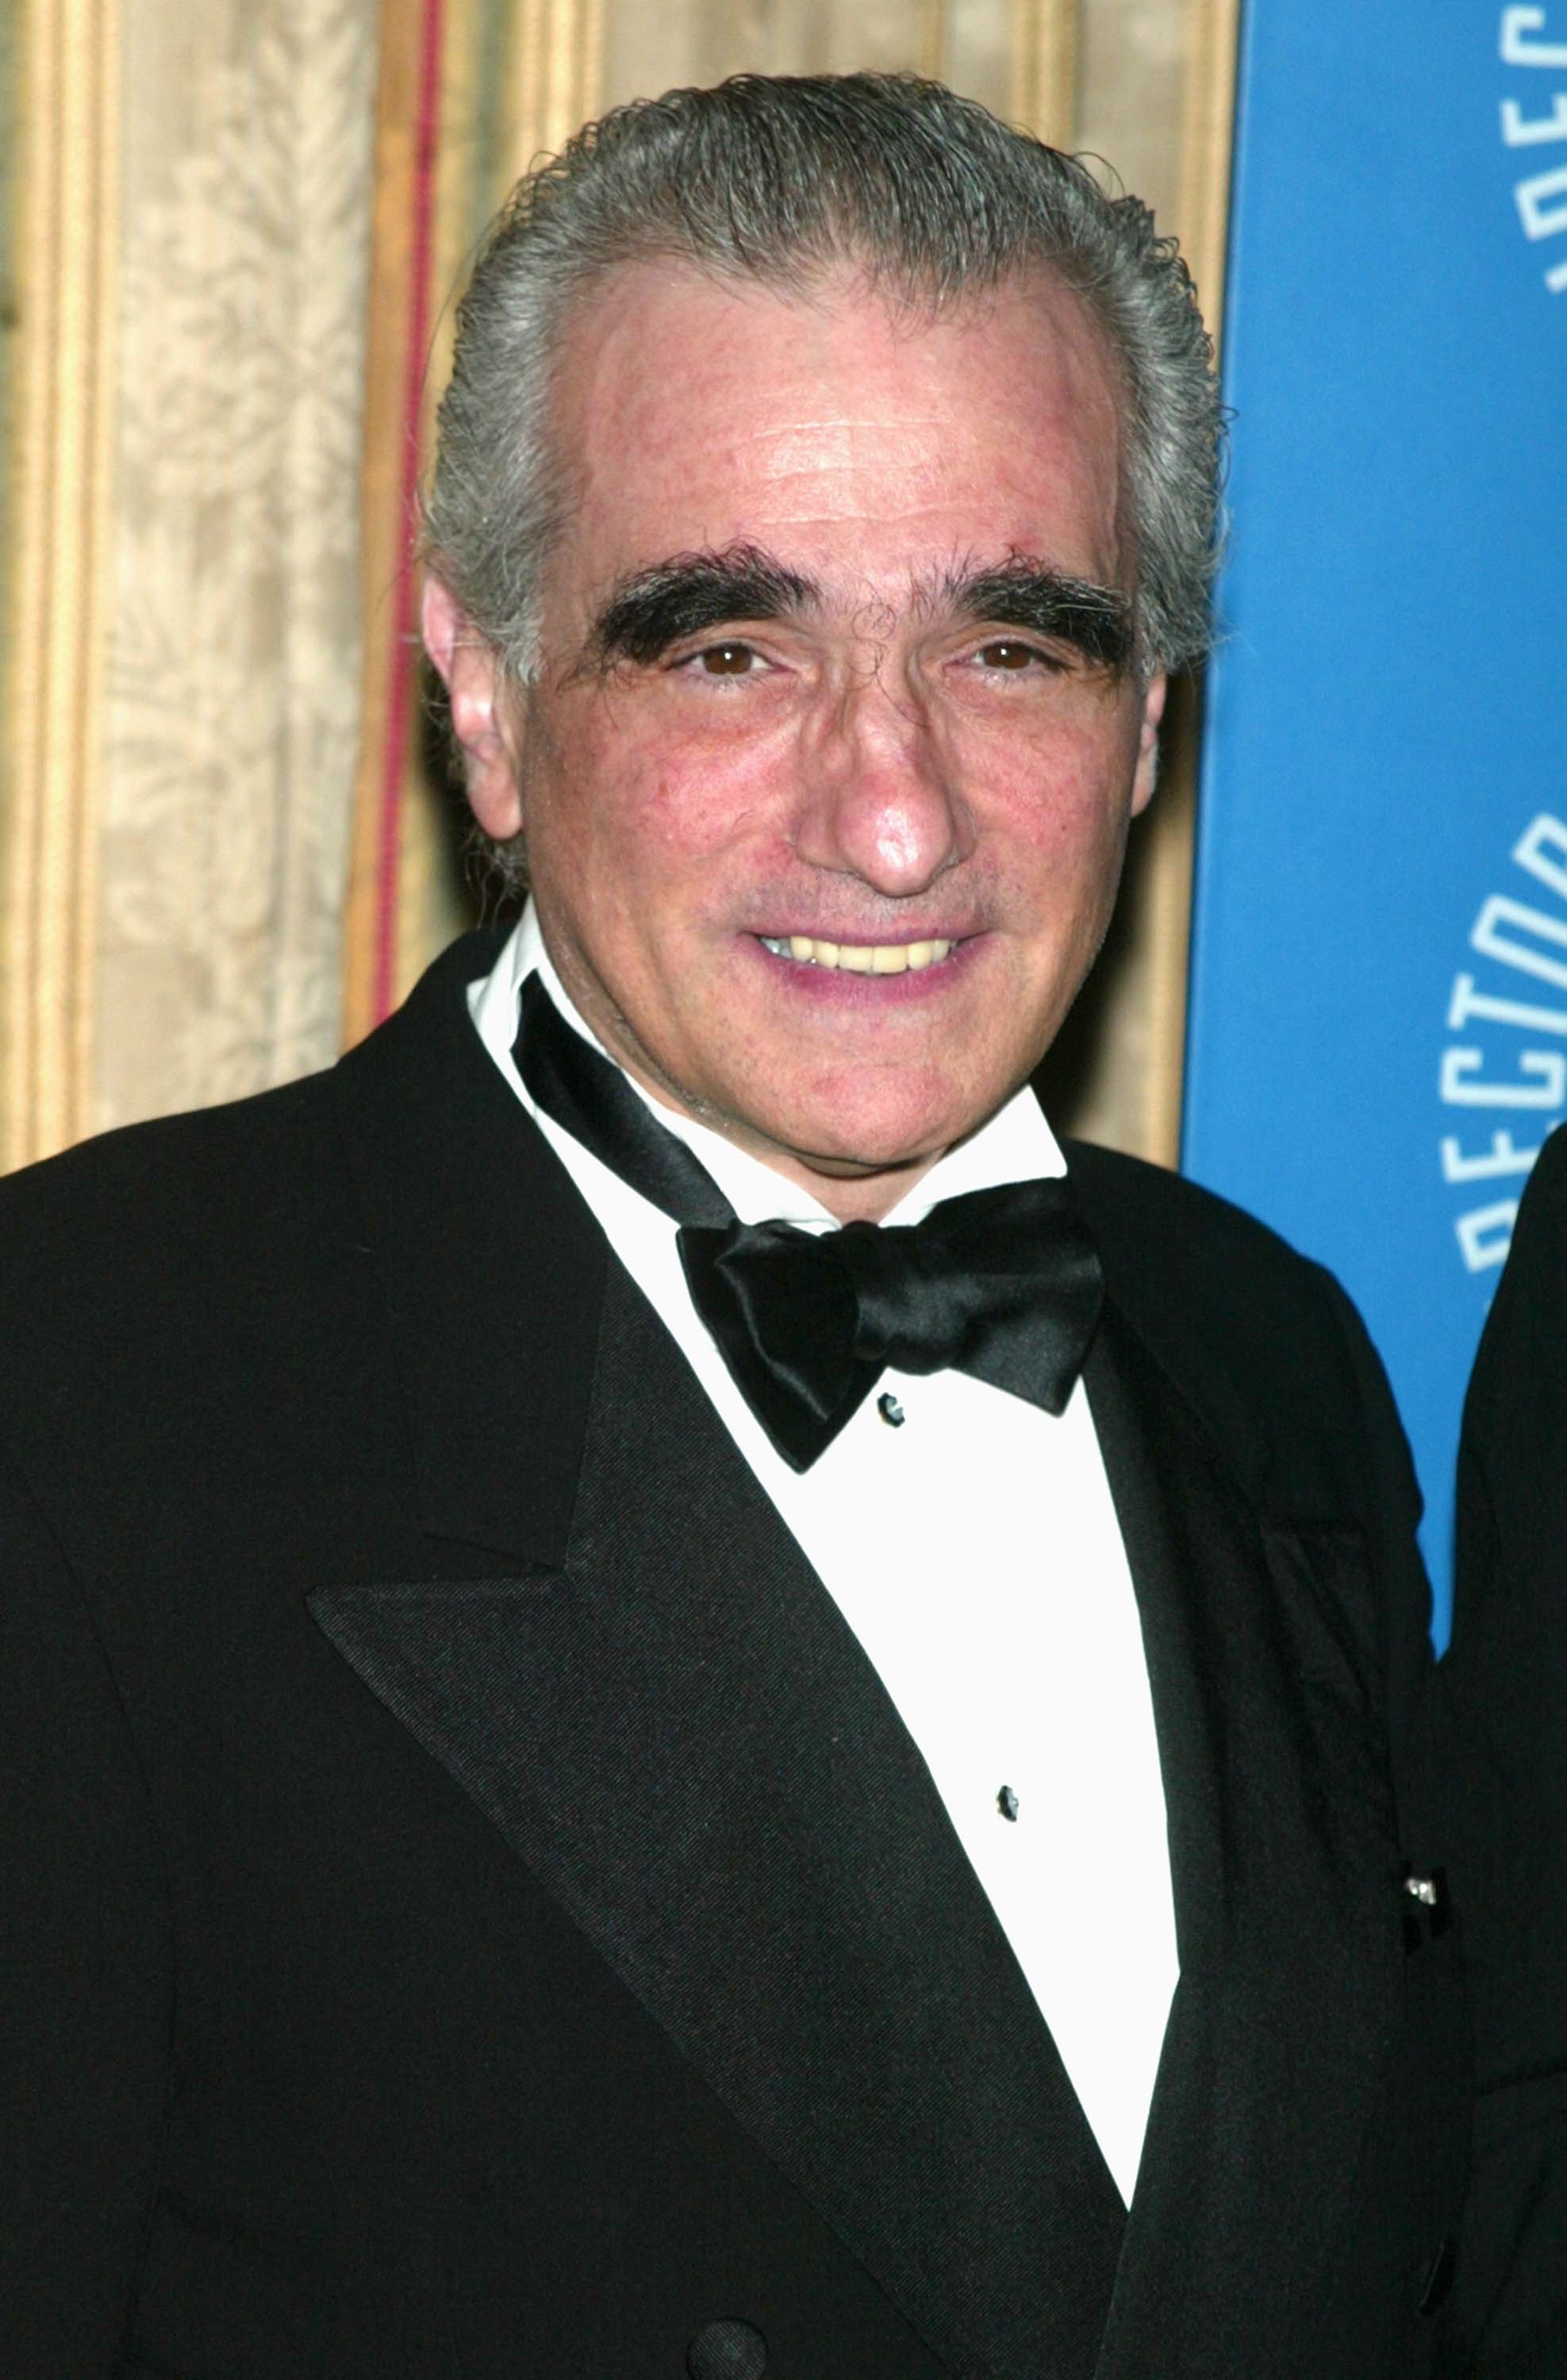 Close-up of Martin smiling in a suit and bow tie at a media event